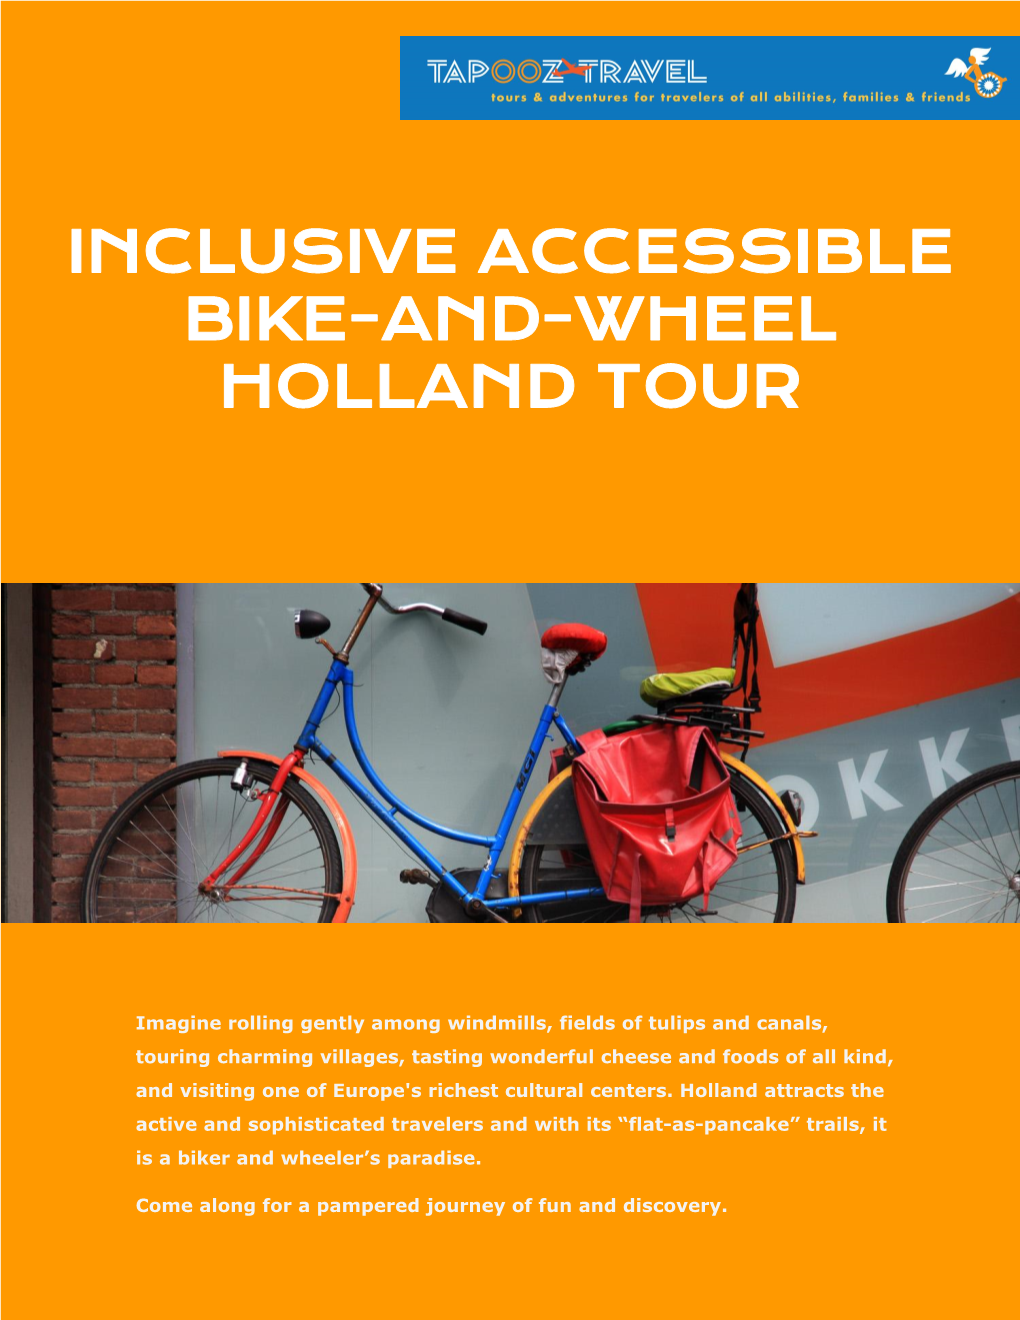 Inclusive Accessible Bike-And-Wheel Holland Tour